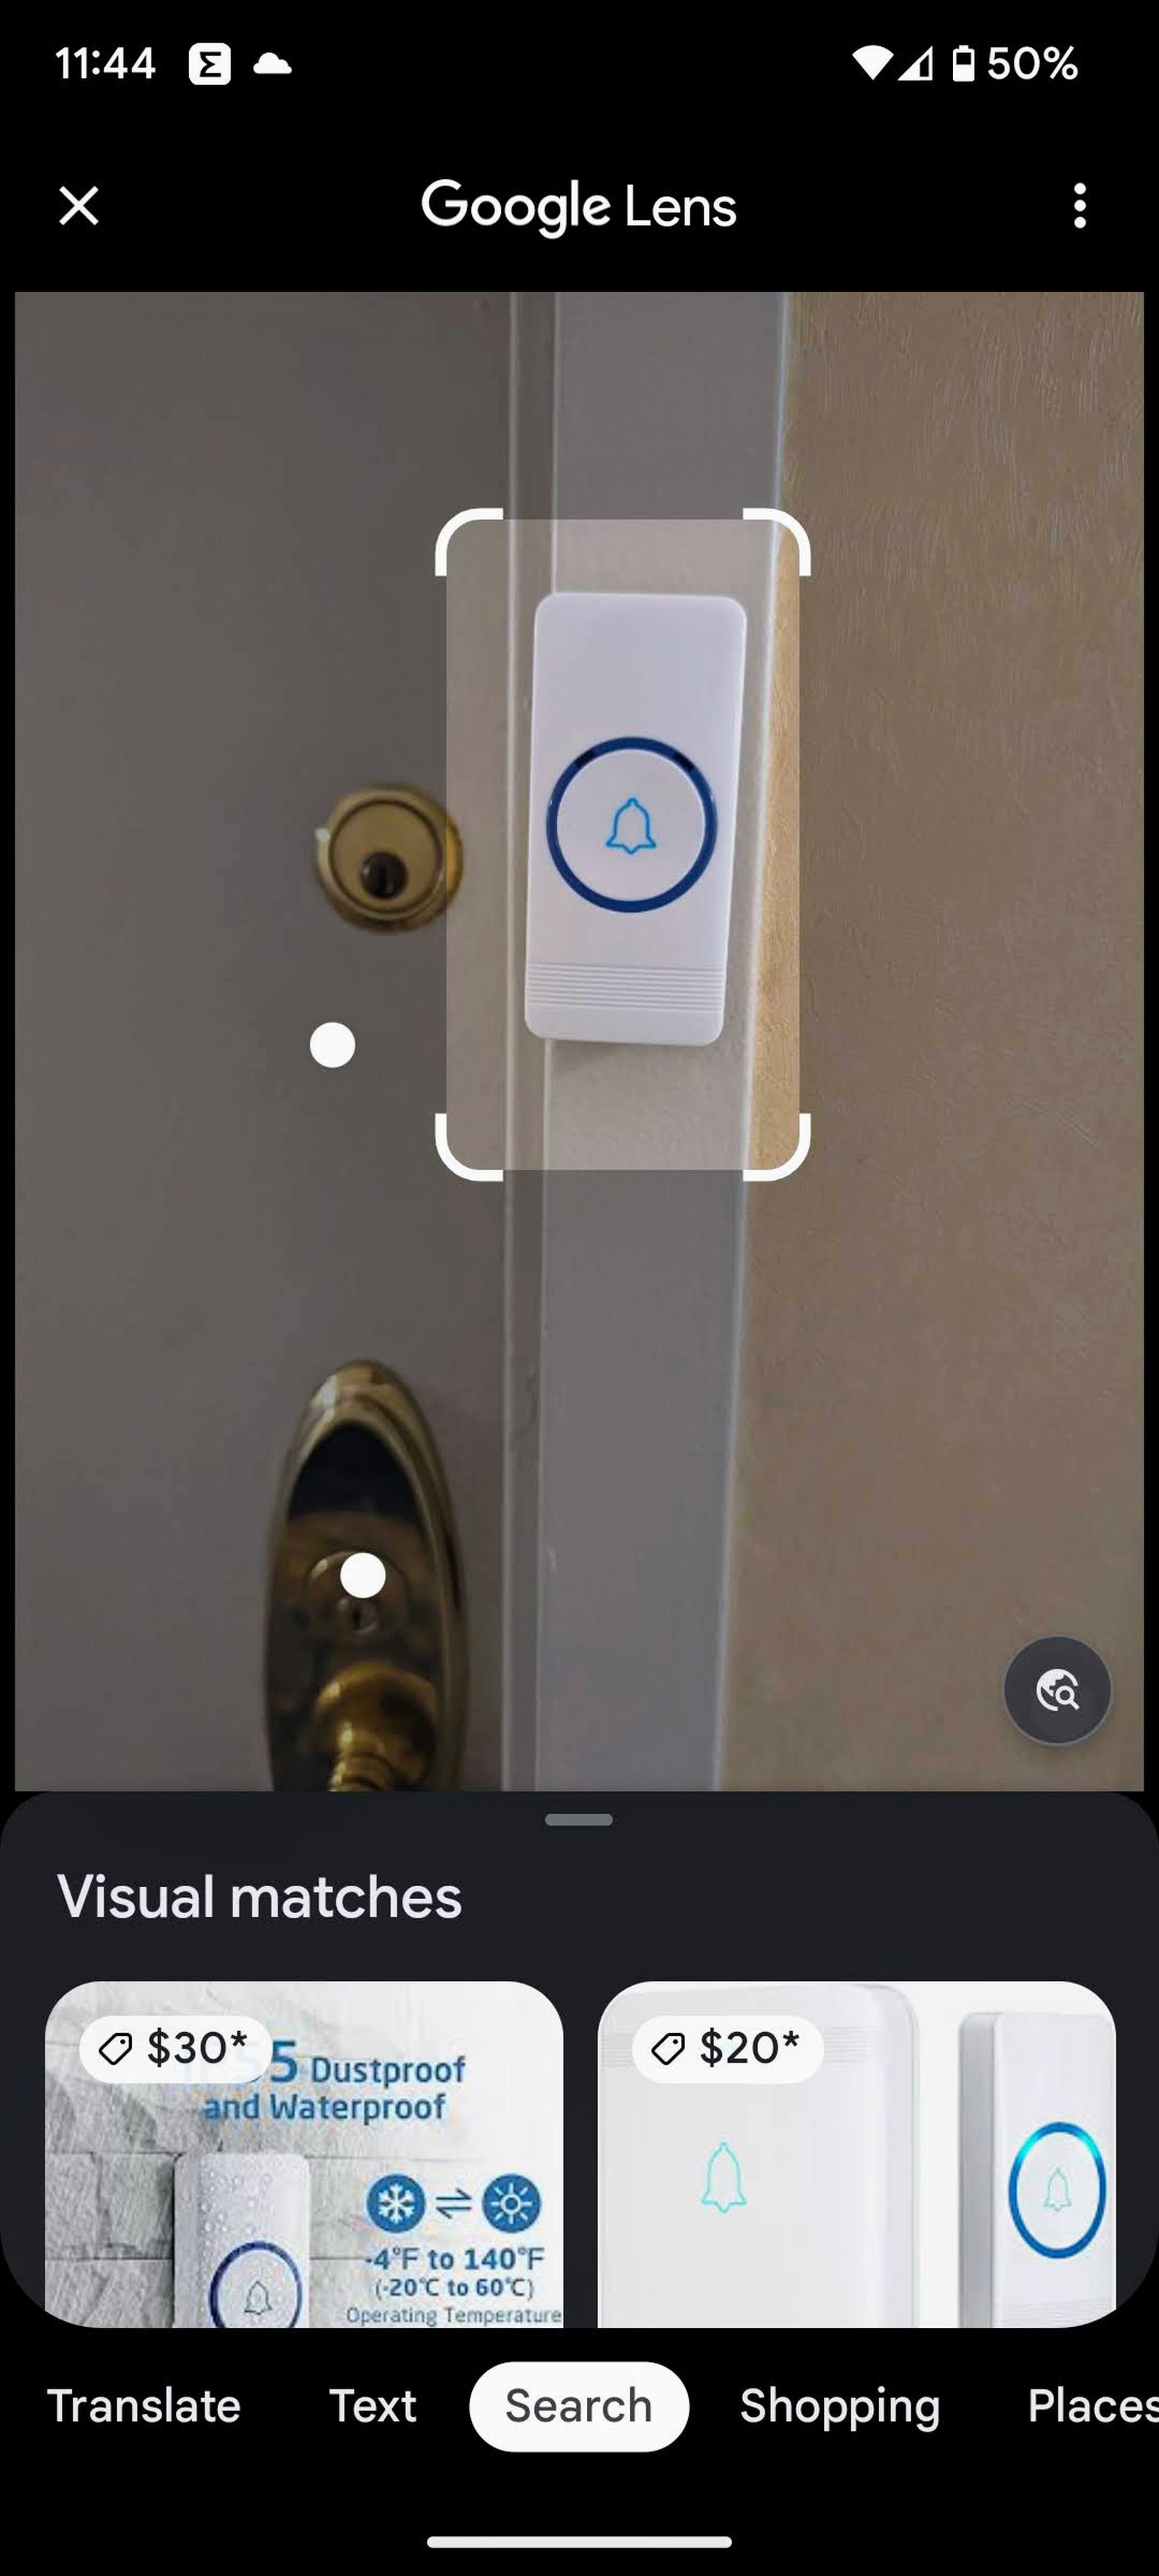 An electronic doorbell on the side of a door, with a lock to the left, and photos from Google Lens below identifying the make and model.